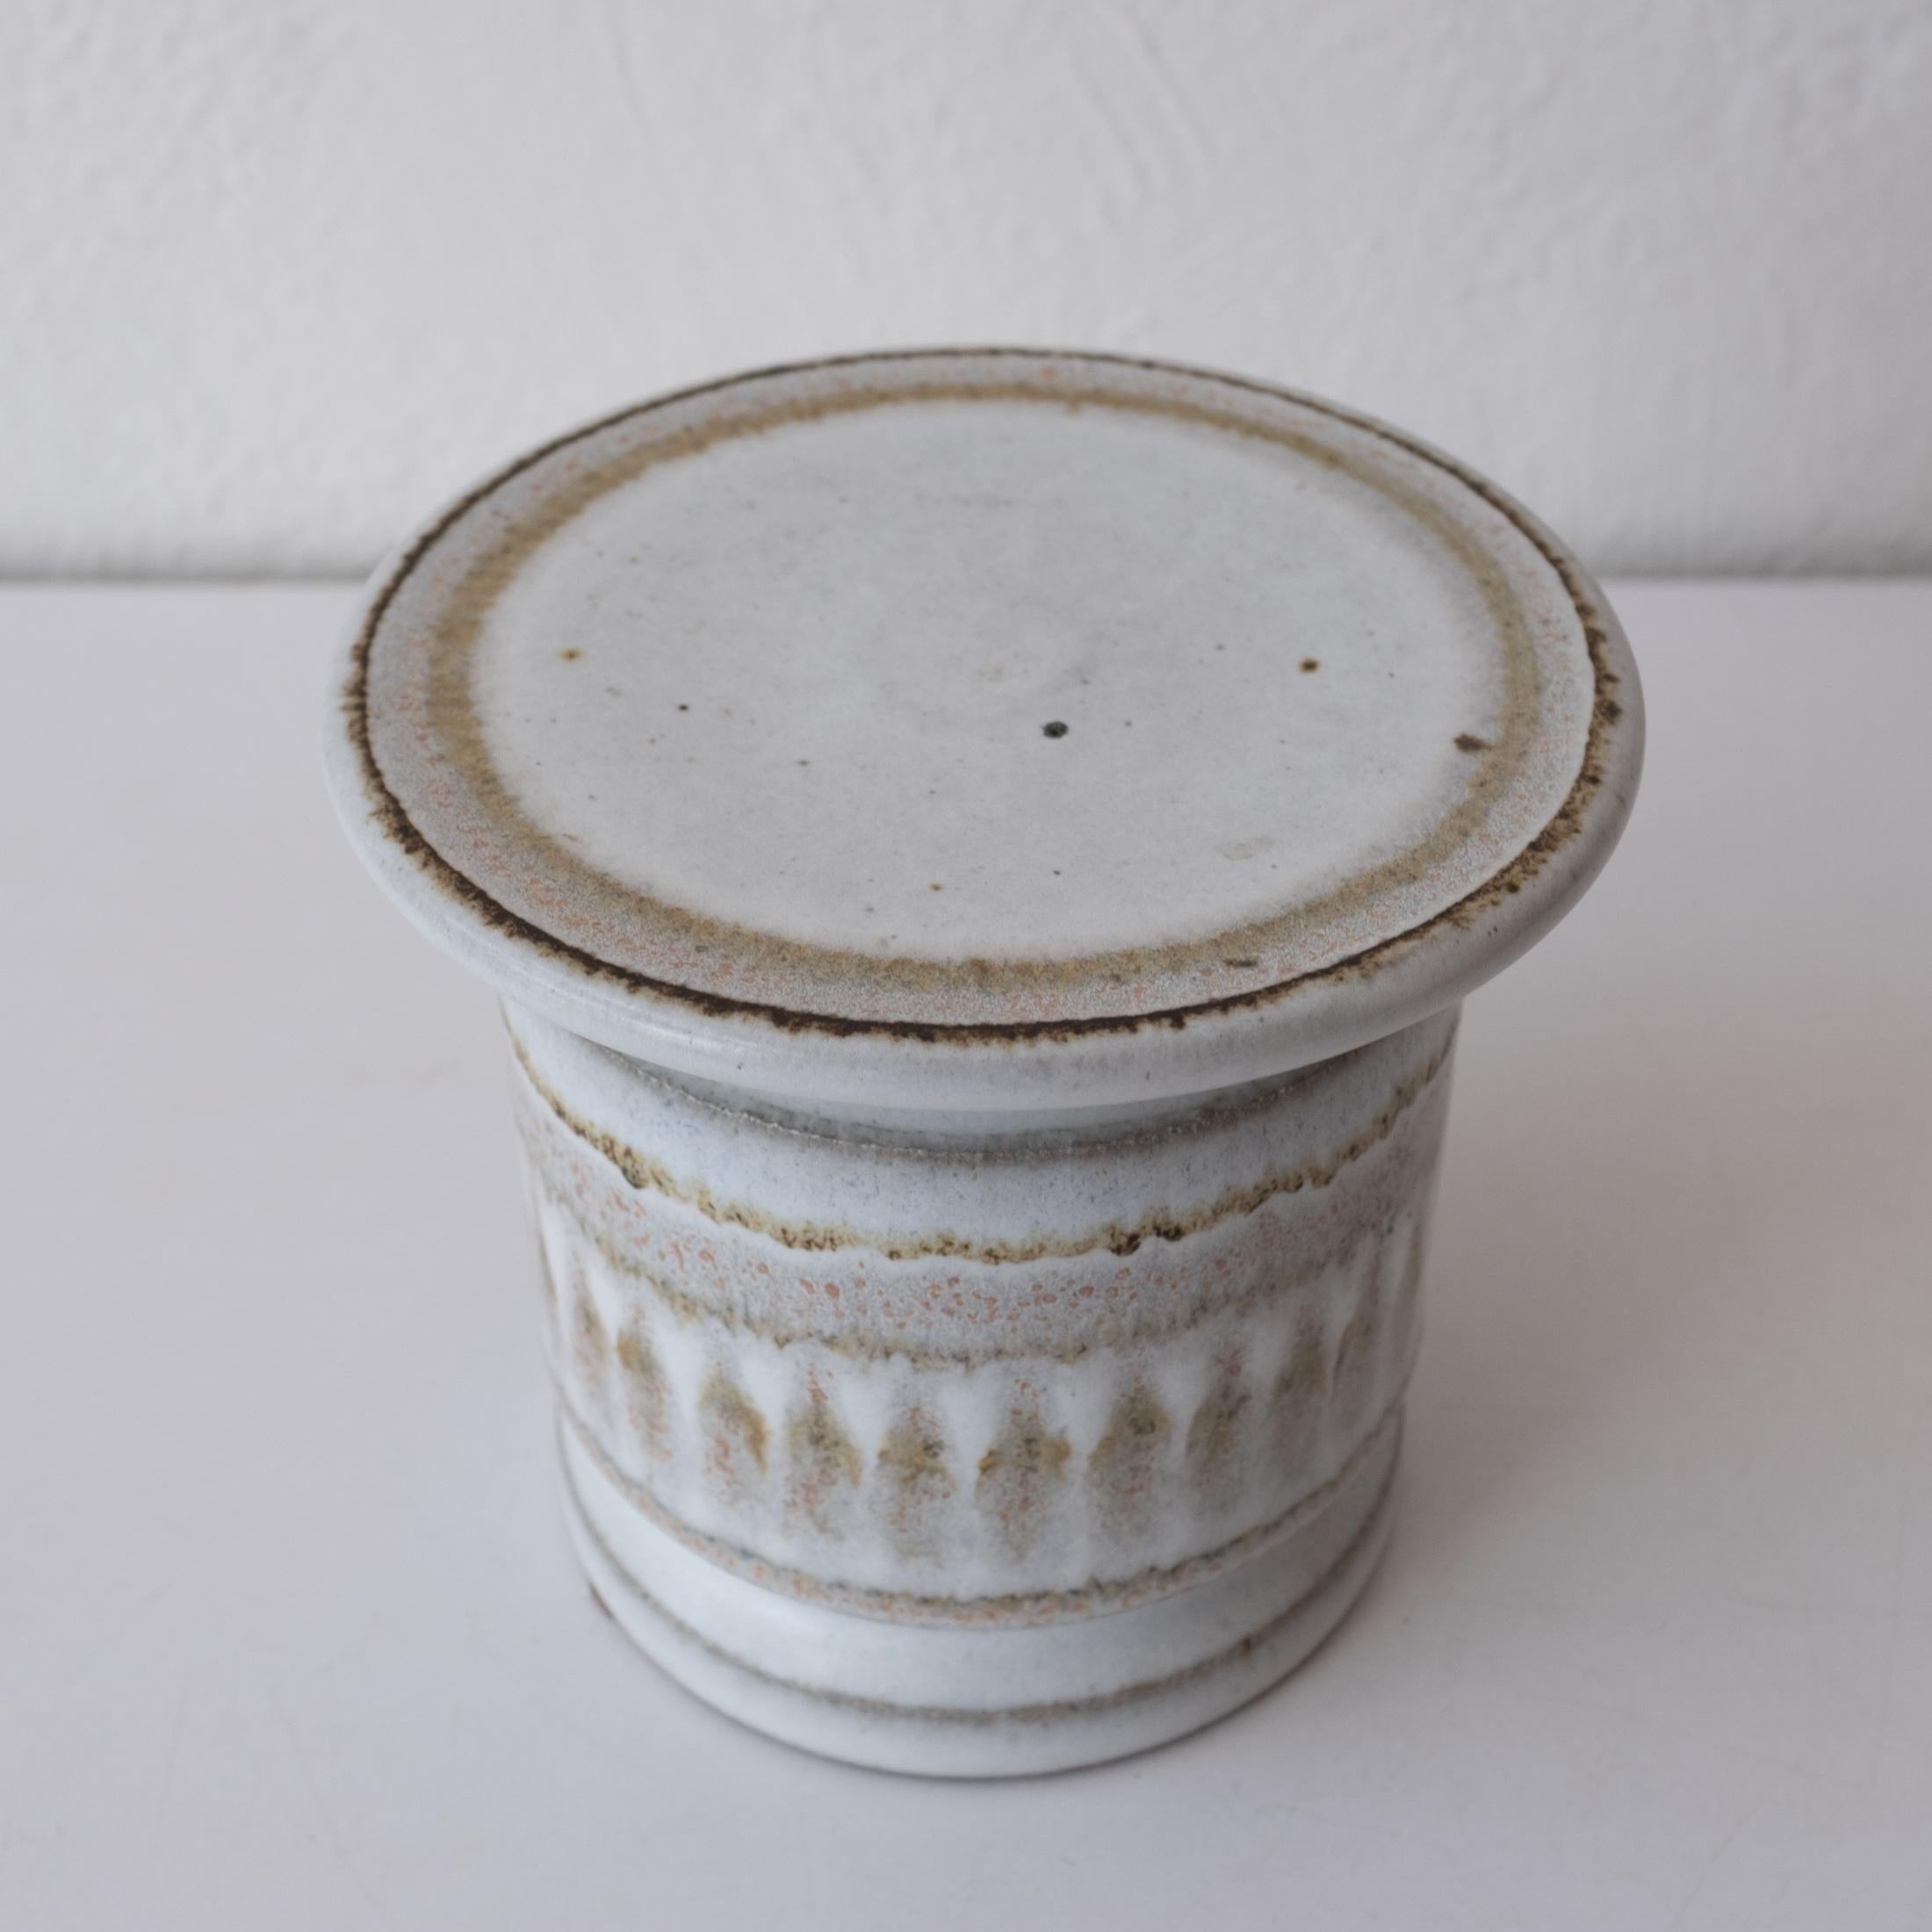 Stoneware pedestal or column candle holder by David Cressey and Robert Maxwell for their company, Earthgender. 

Signed on the bottom. 1970s.